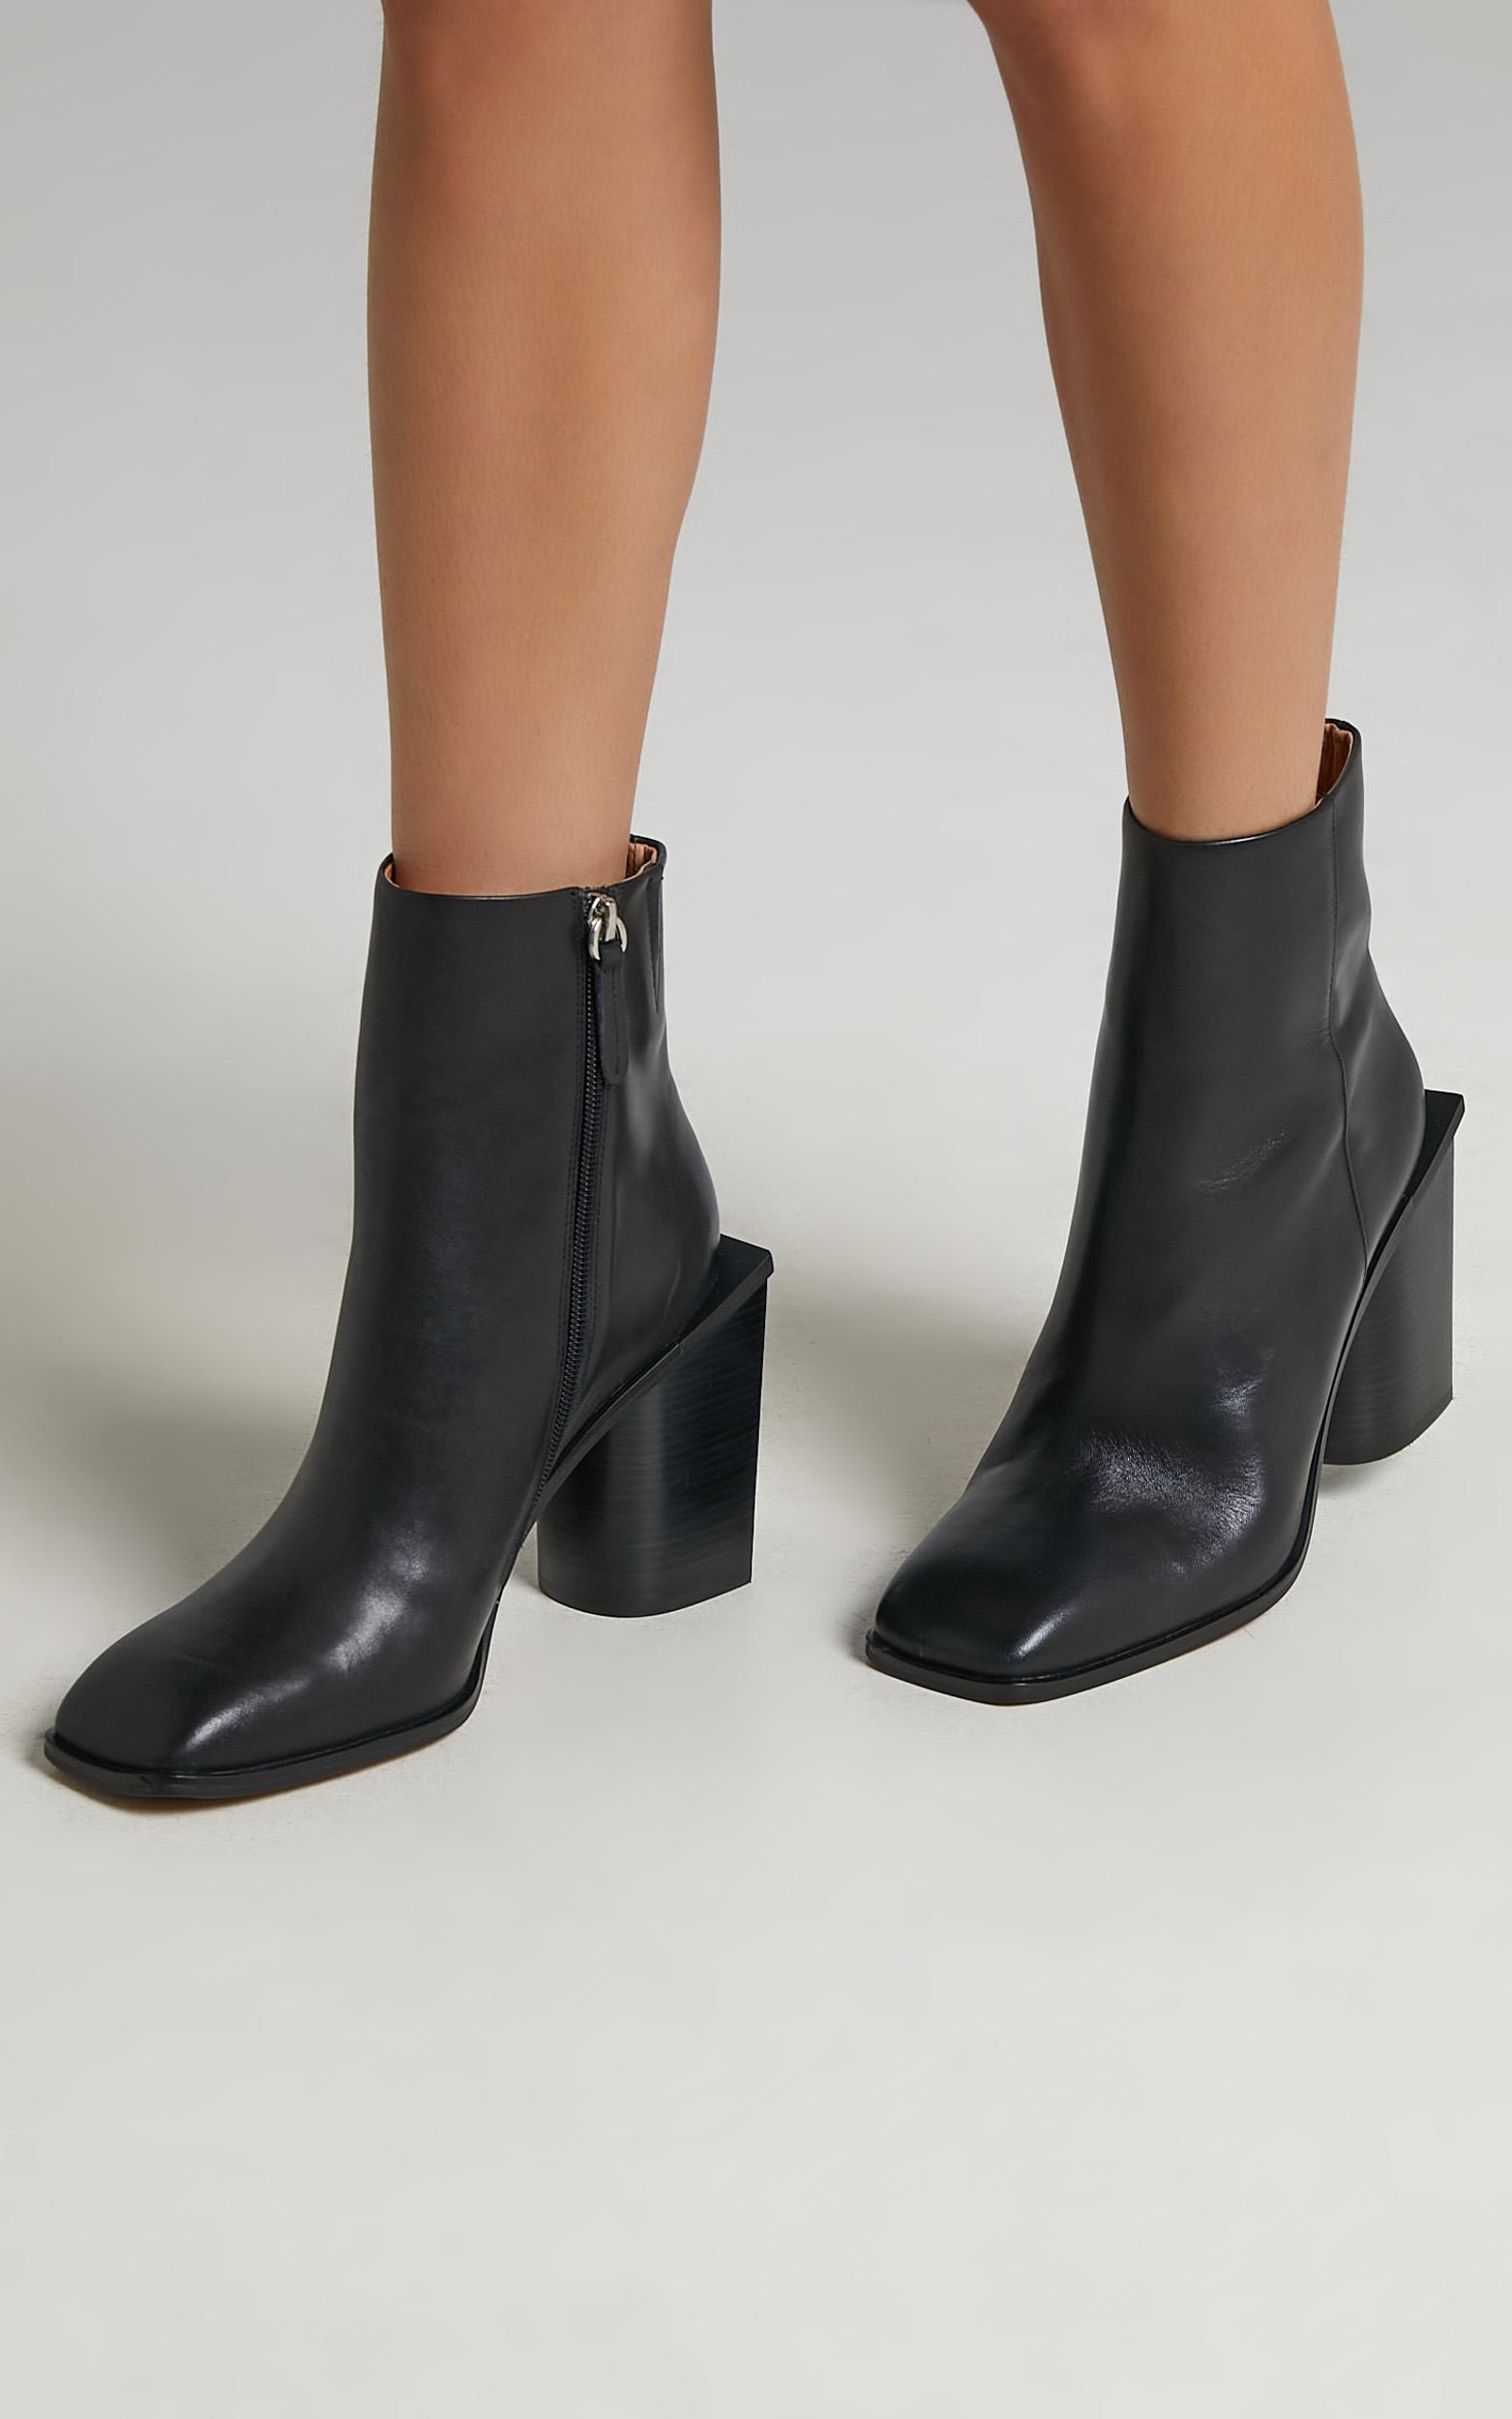 Alias Mae - Sylvie Boots in Black Burnished - 5.5, BLK2, hi-res image number null